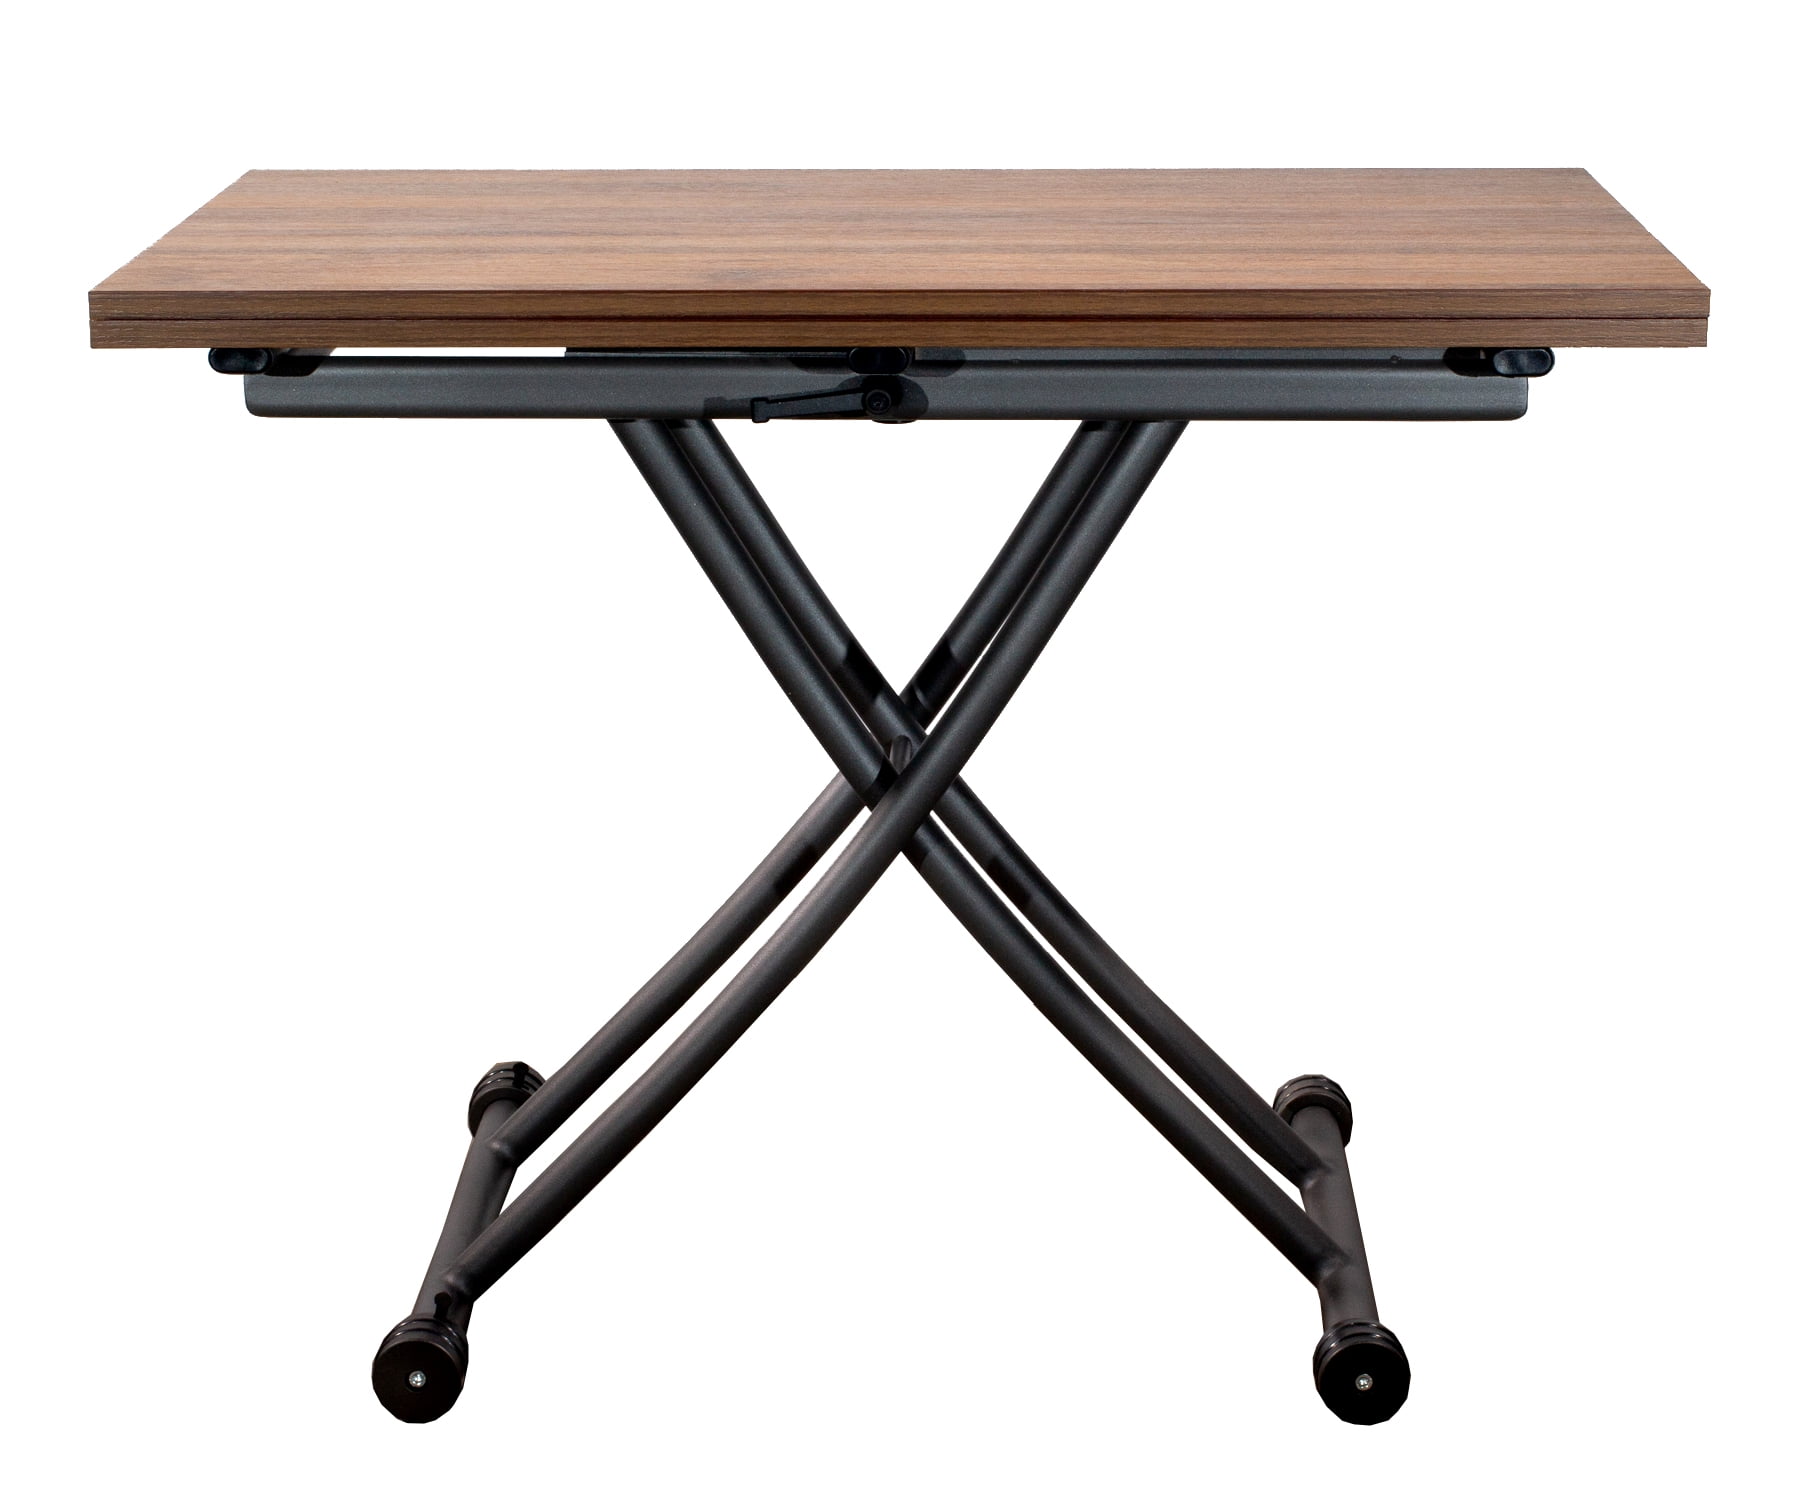 Light Wood SpaceMaster Transforming X-Table 2.0 Multi-Purpose Wheeled Adjustable Expanding X Lift Coffee and Dining Table